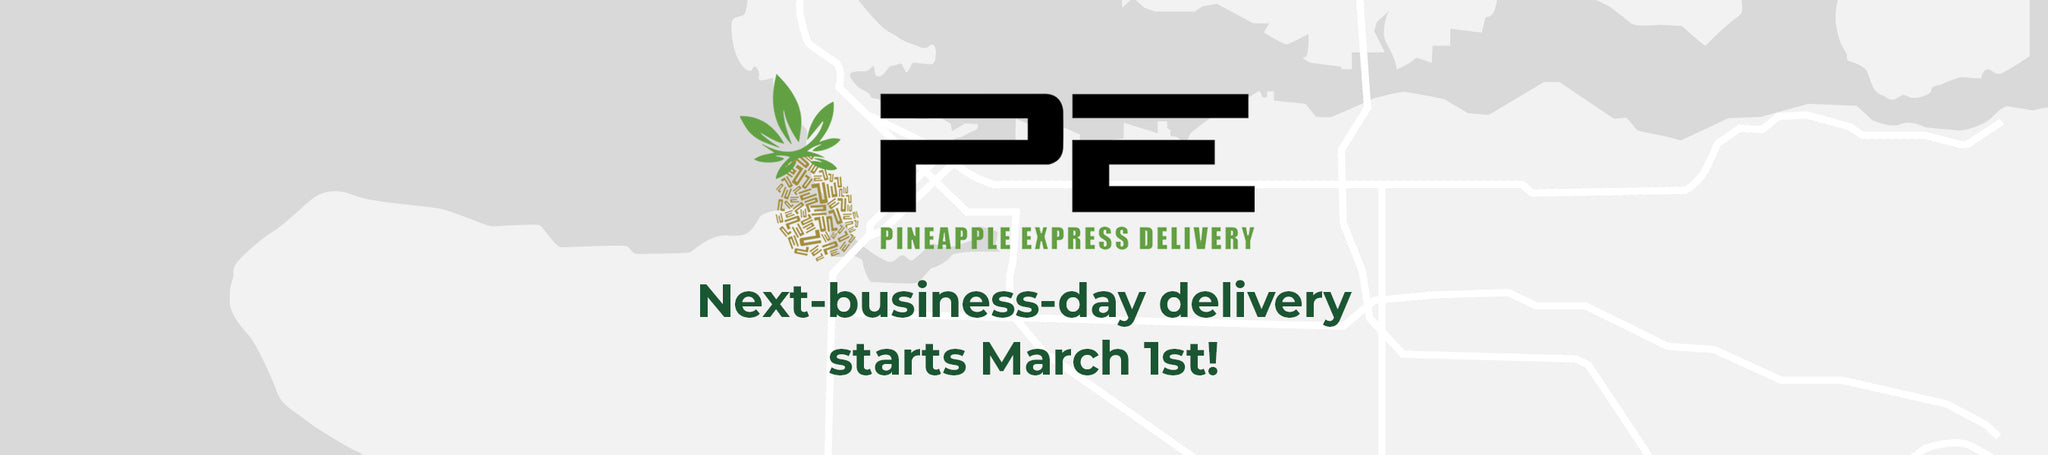 Pineapple Express Delivery Service